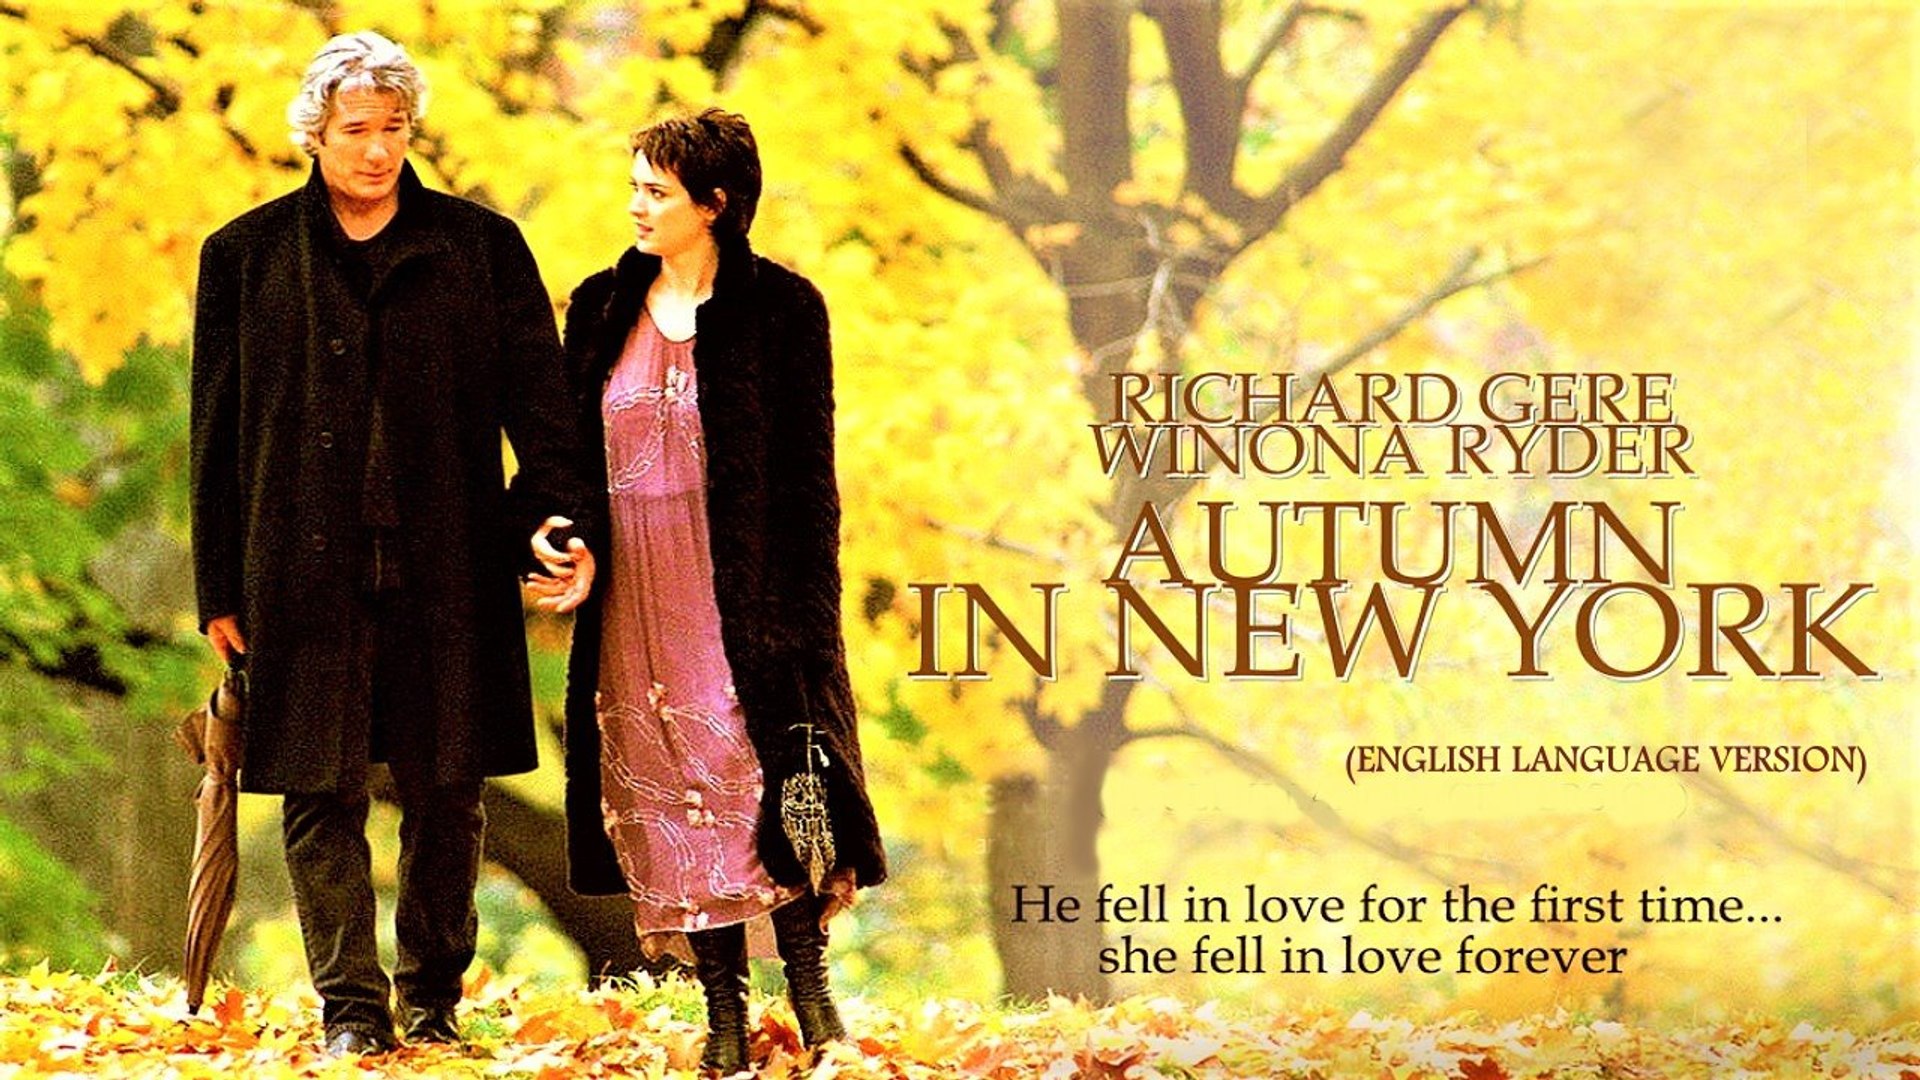 Autumn in New York (2000) (english version) Full HD - Video Dailymotion